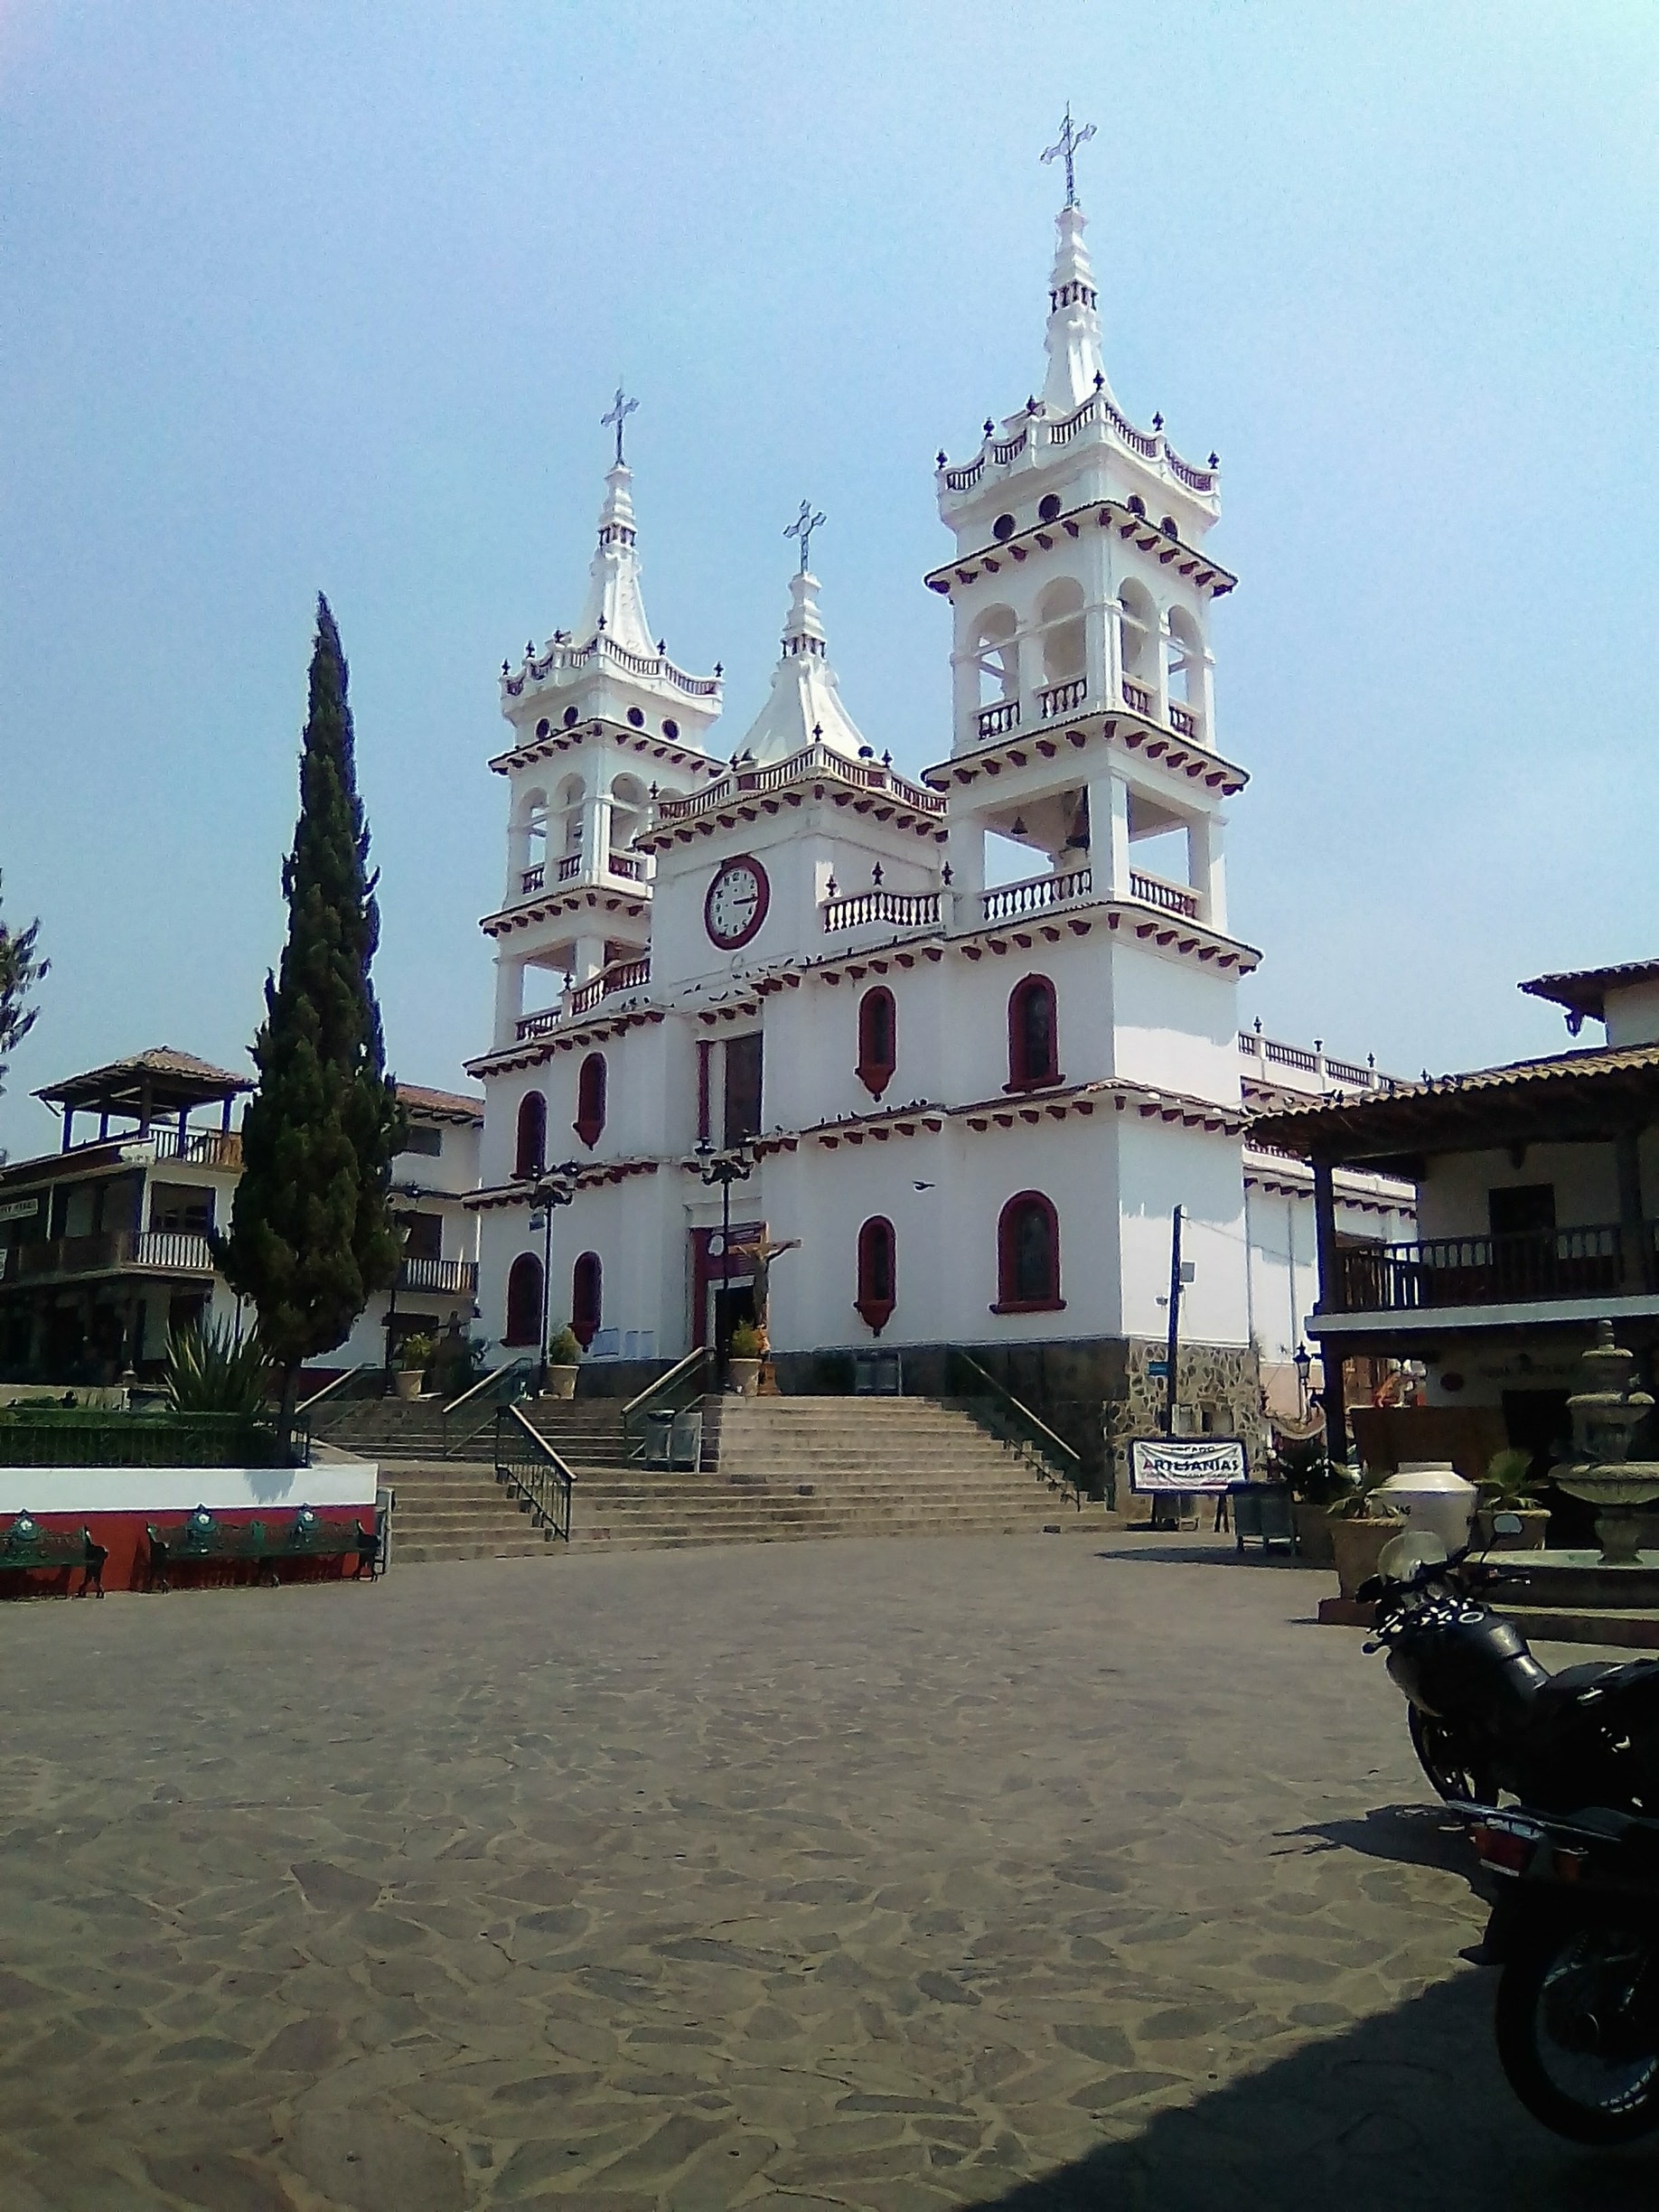 The church in the mountain town of Mazamitla, Jalisco, Mexico